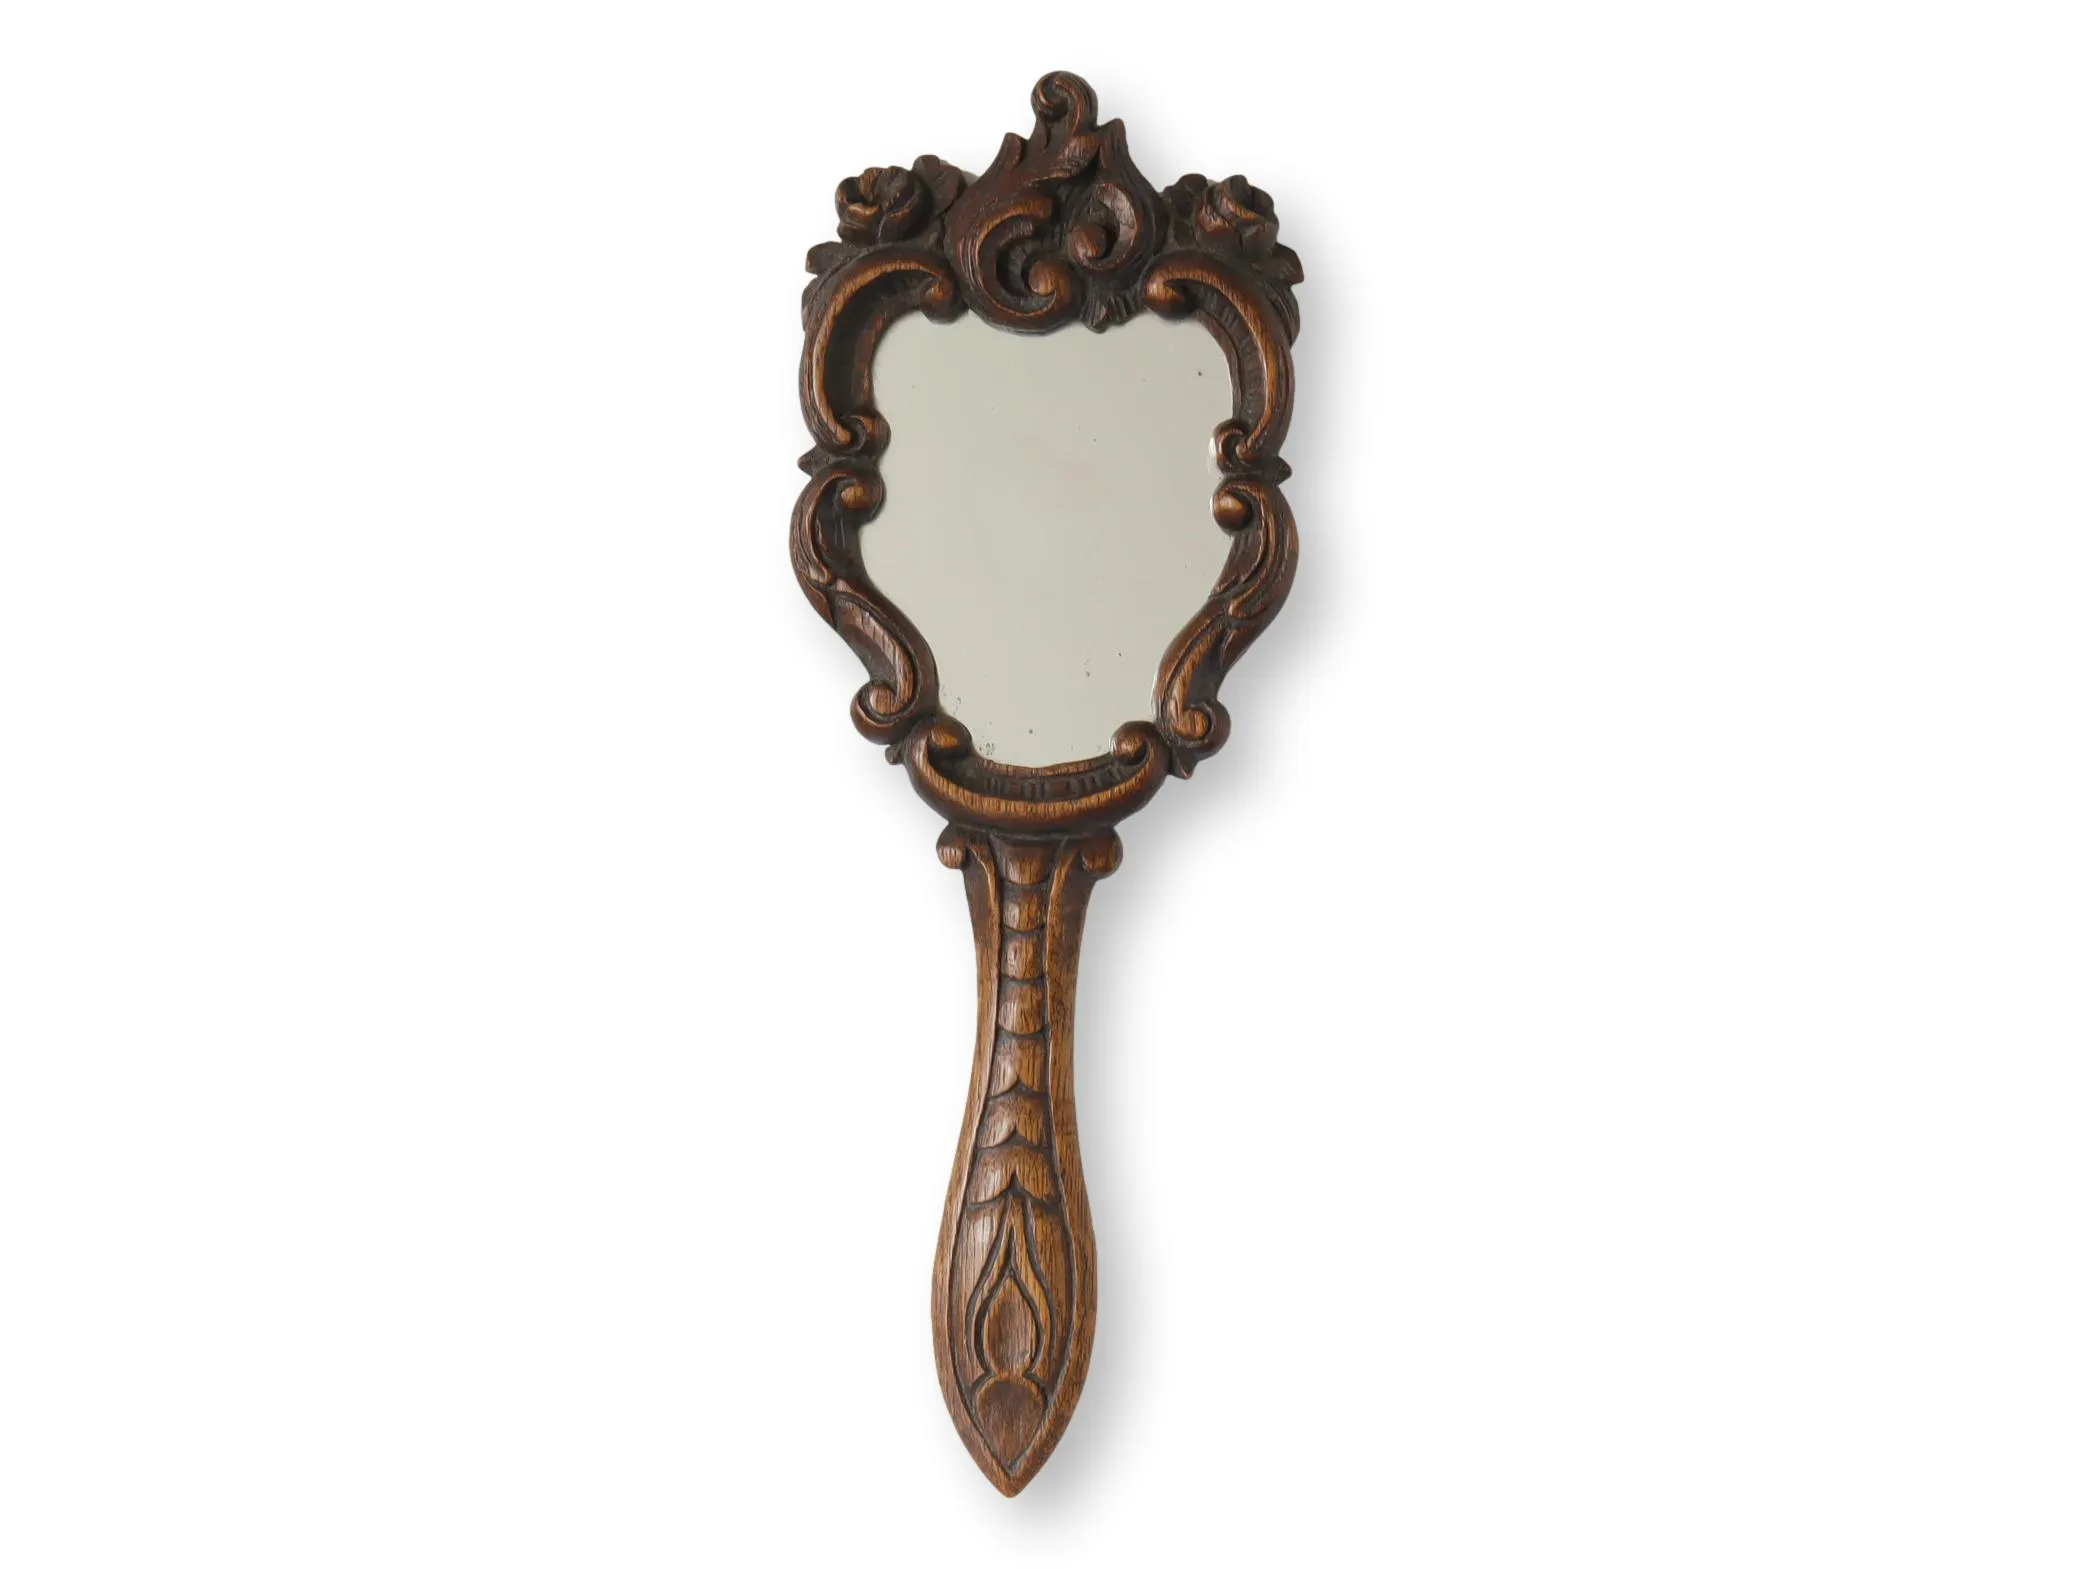 Antique French Hand Mirror - Brown